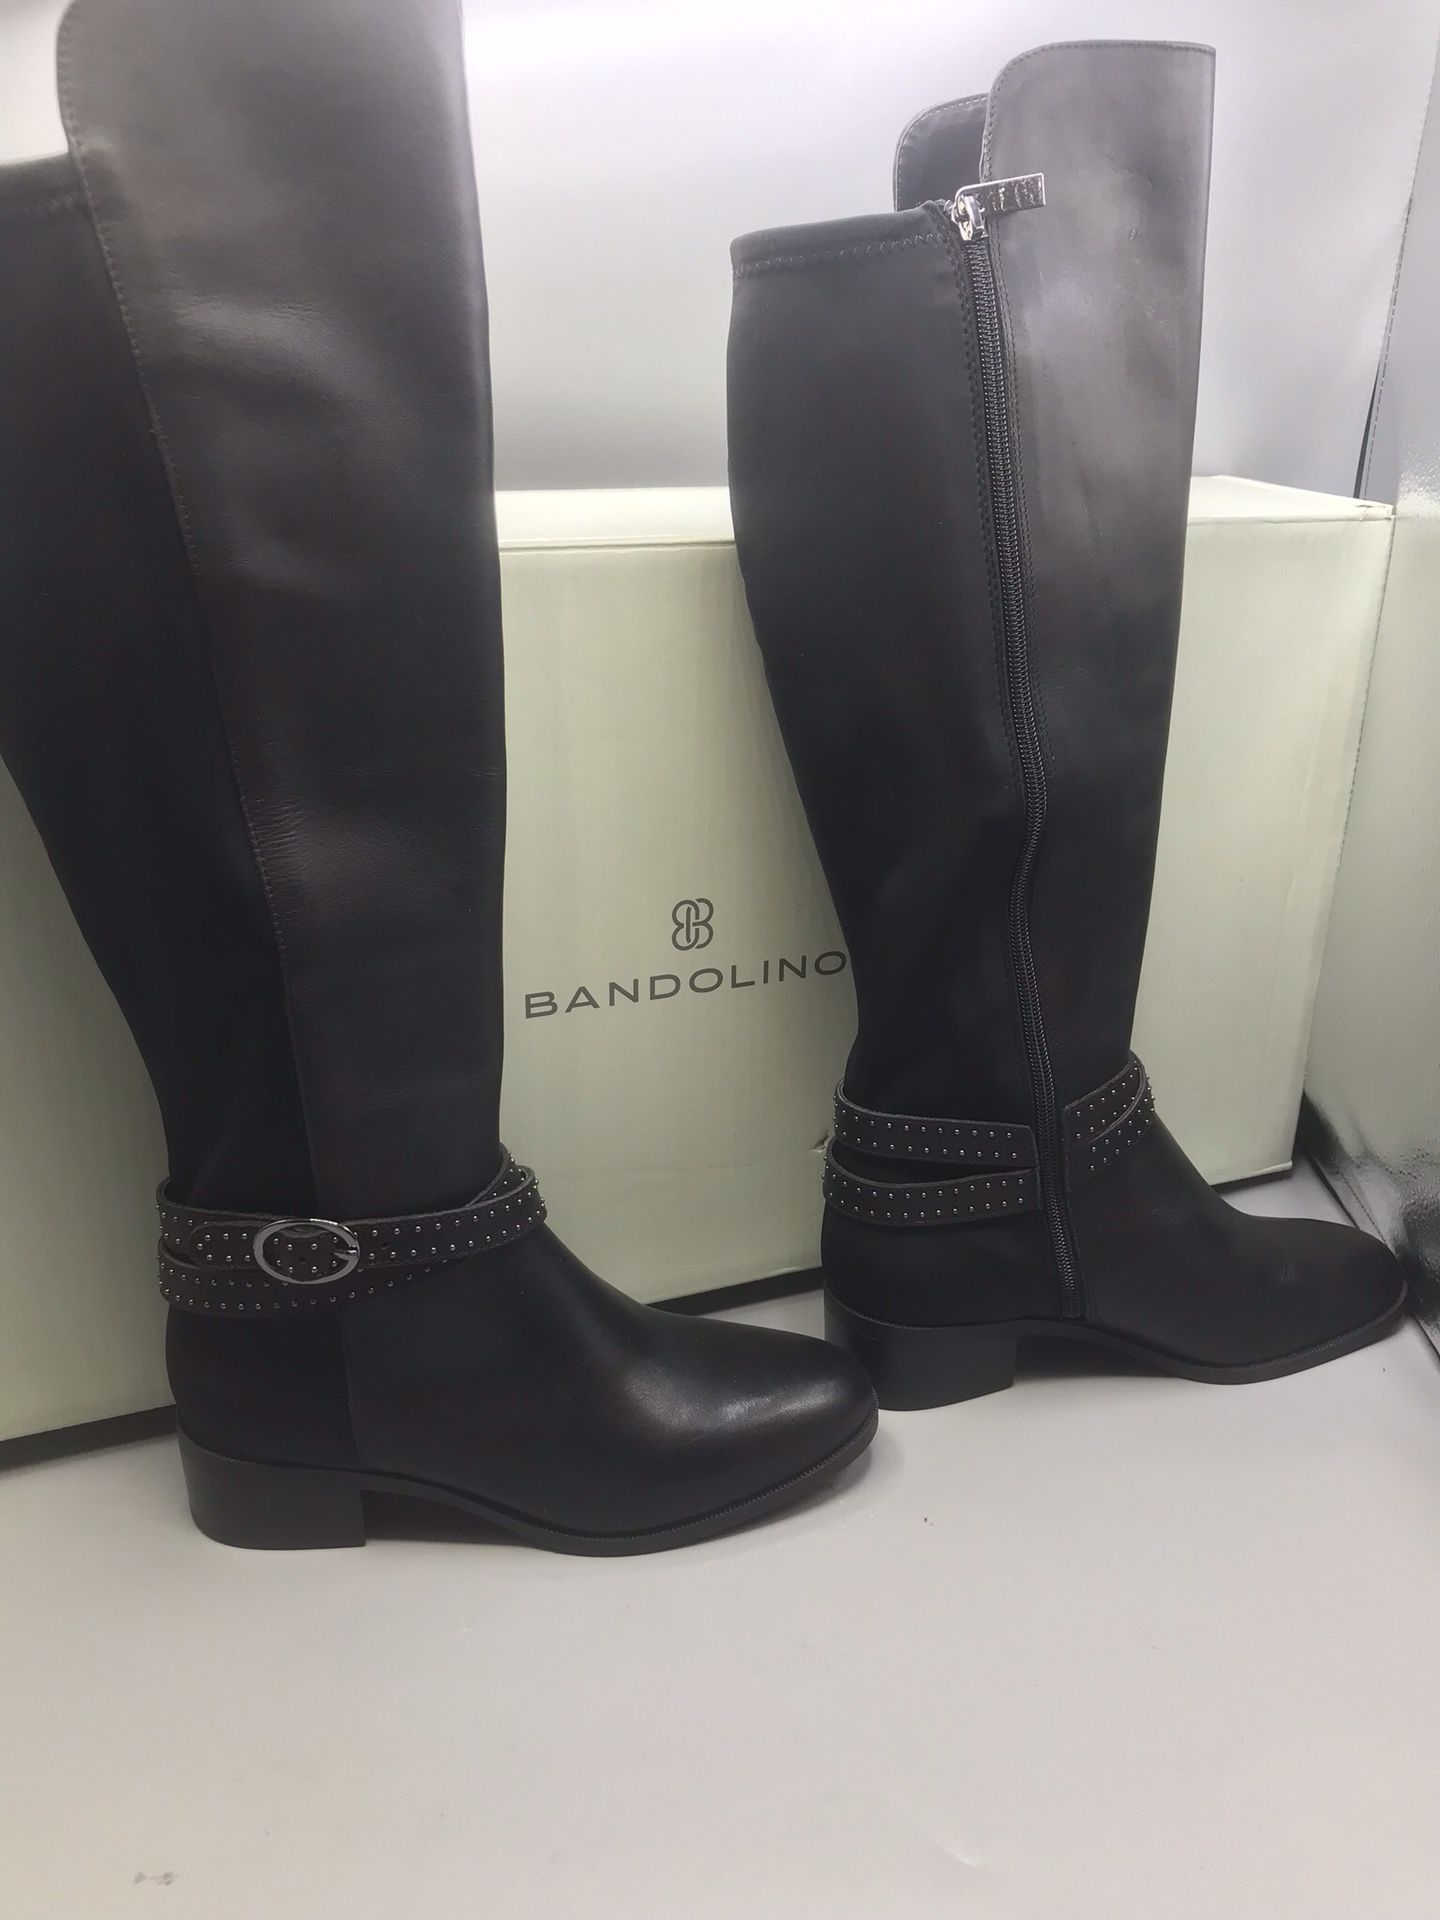 Bandolino Brbryices Women’s Black Tall Leather Knee Hi Boots Size 5.5